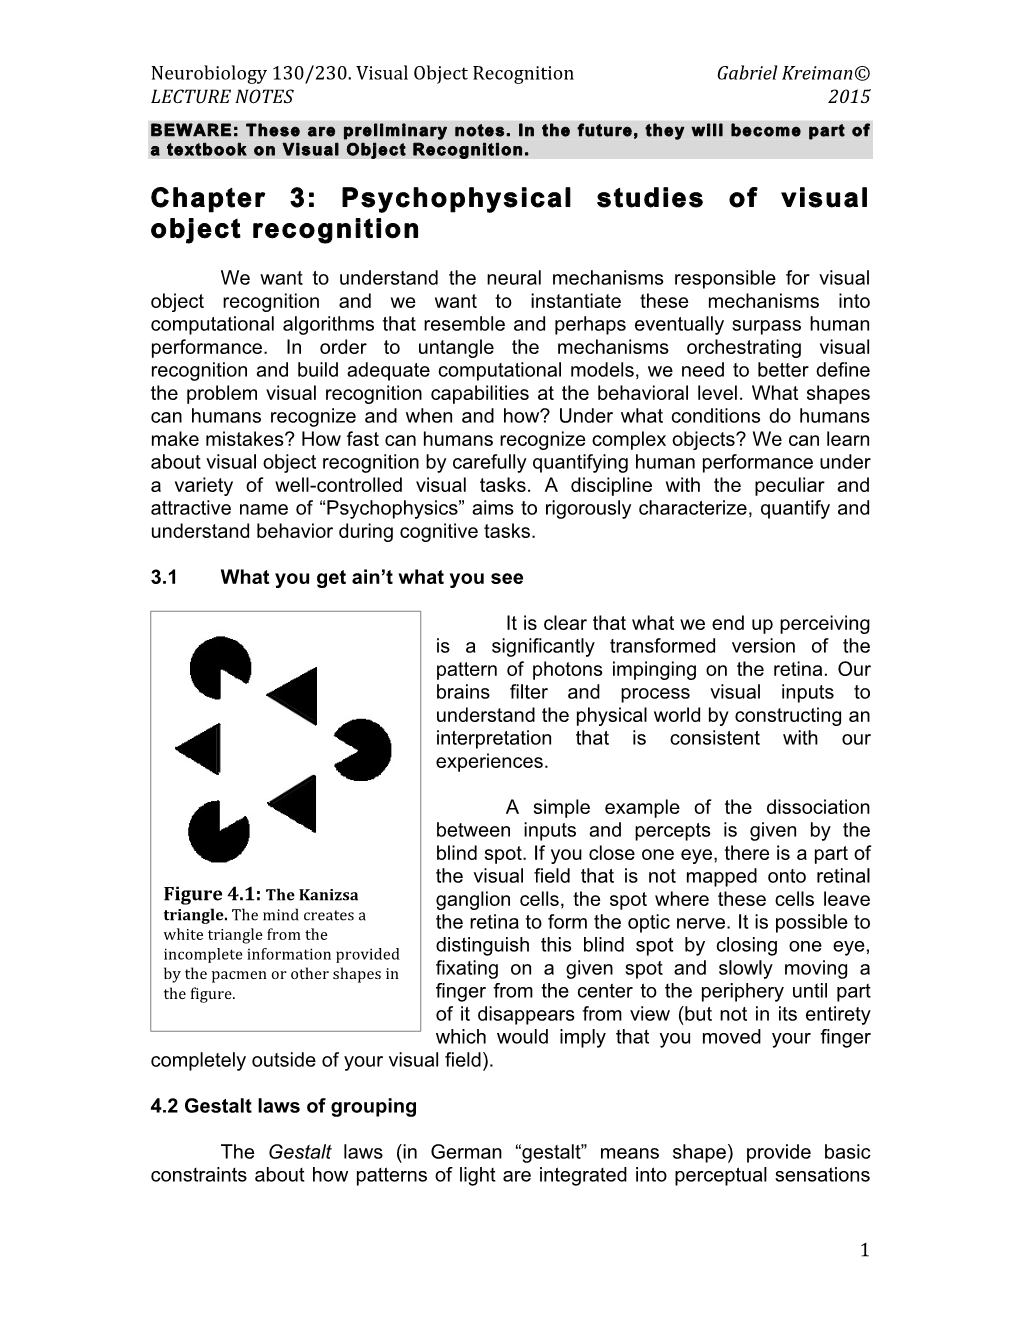 Psychophysical Studies of Visual Object Recognition